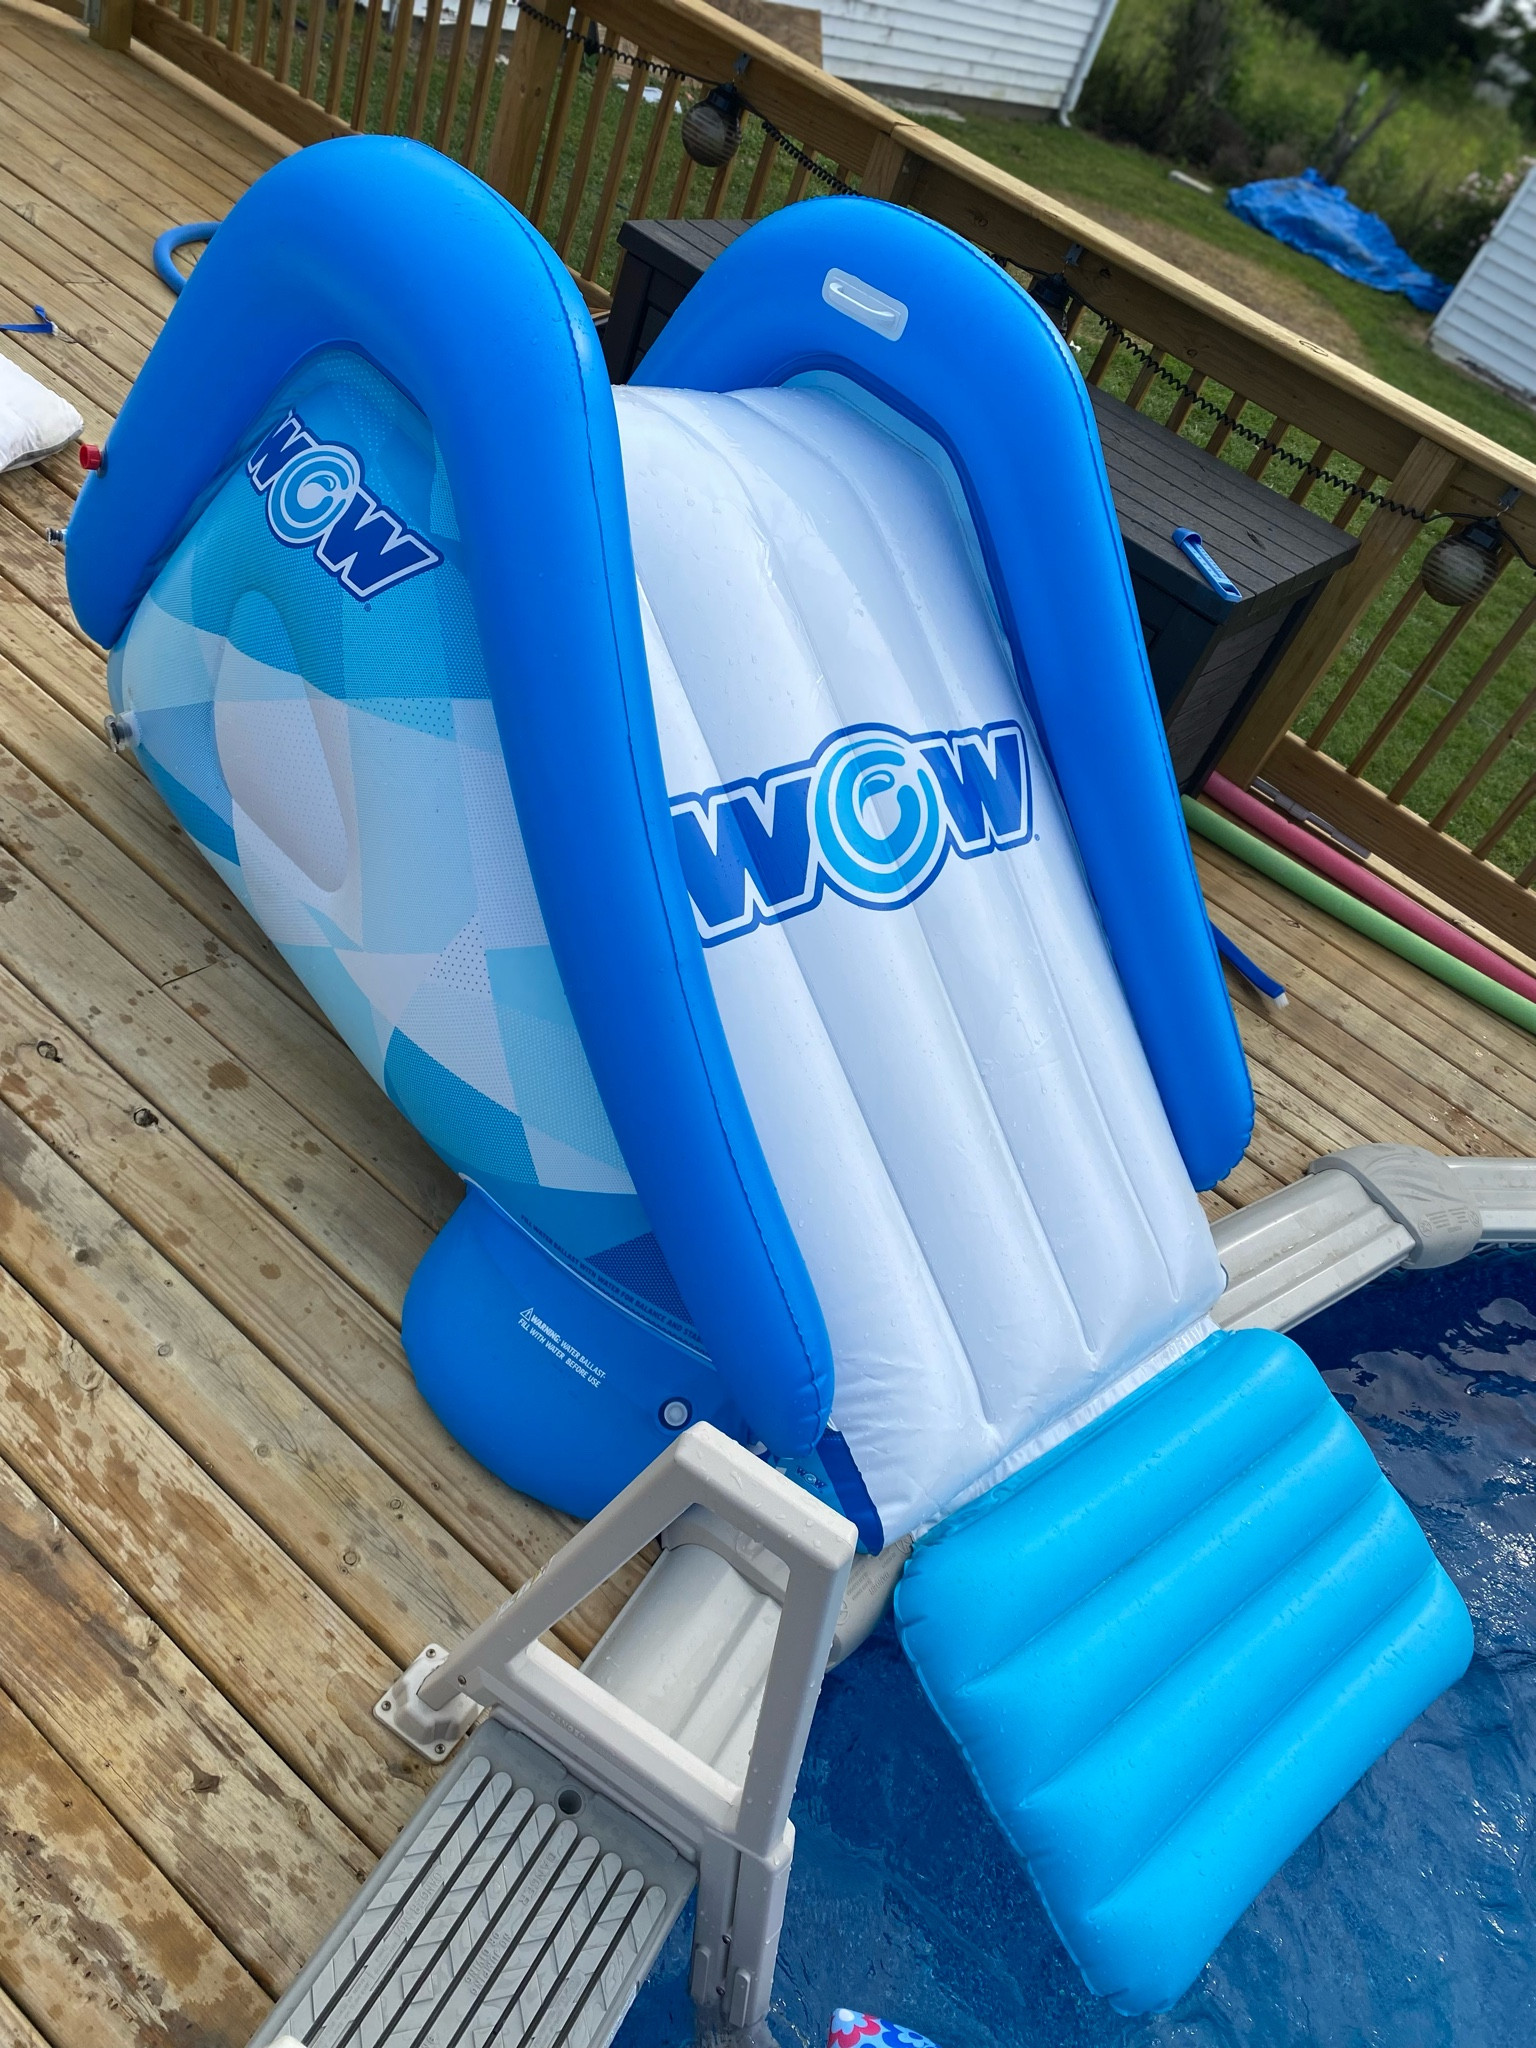 Wow Sports Super Slide with Sprinklers, Blue - Sam's Club